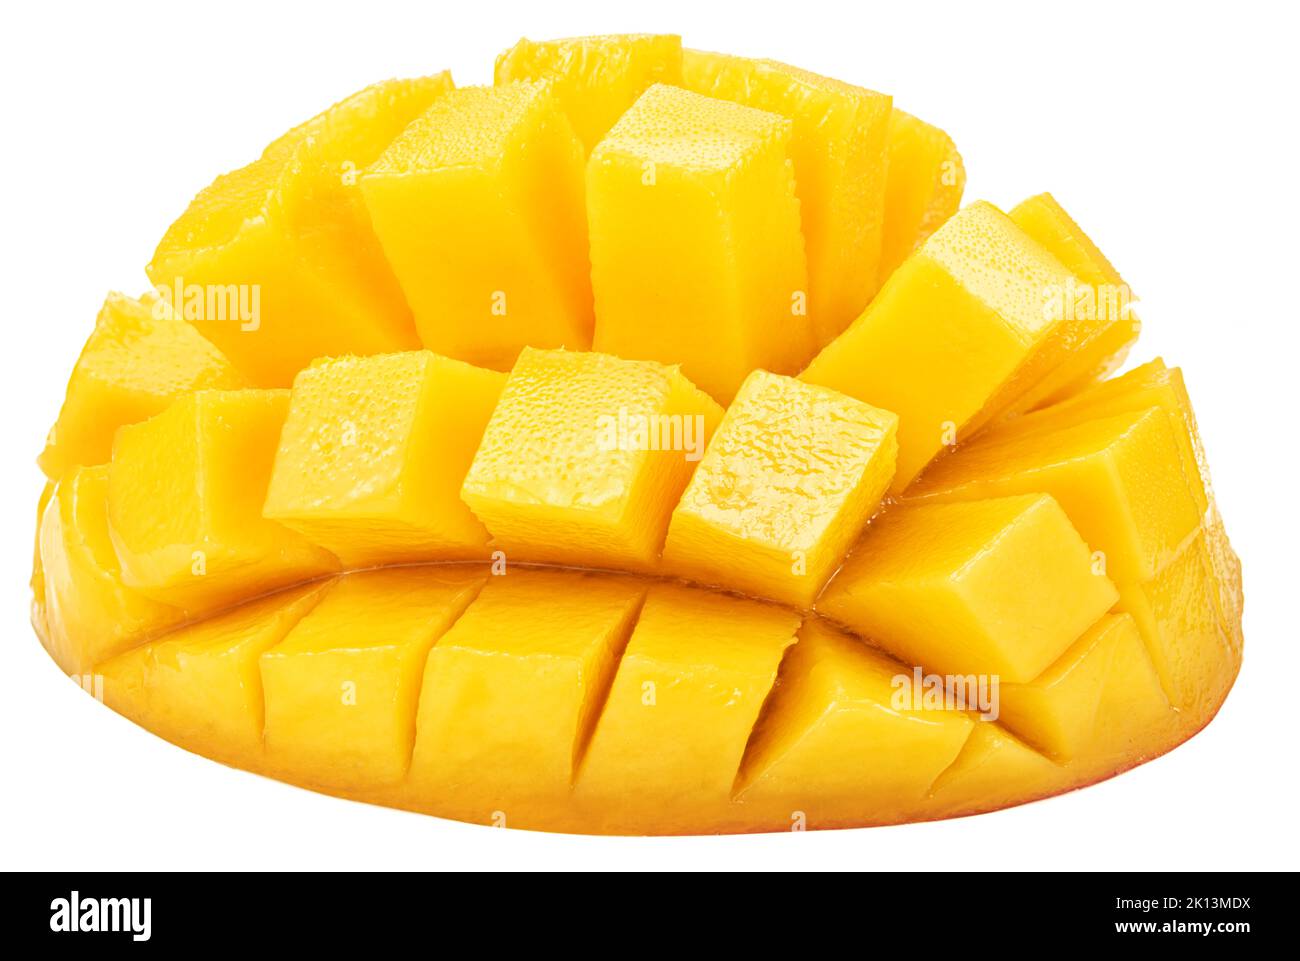 Half of mango fruit cut in hedgehog style. File contains clipping path. Stock Photo